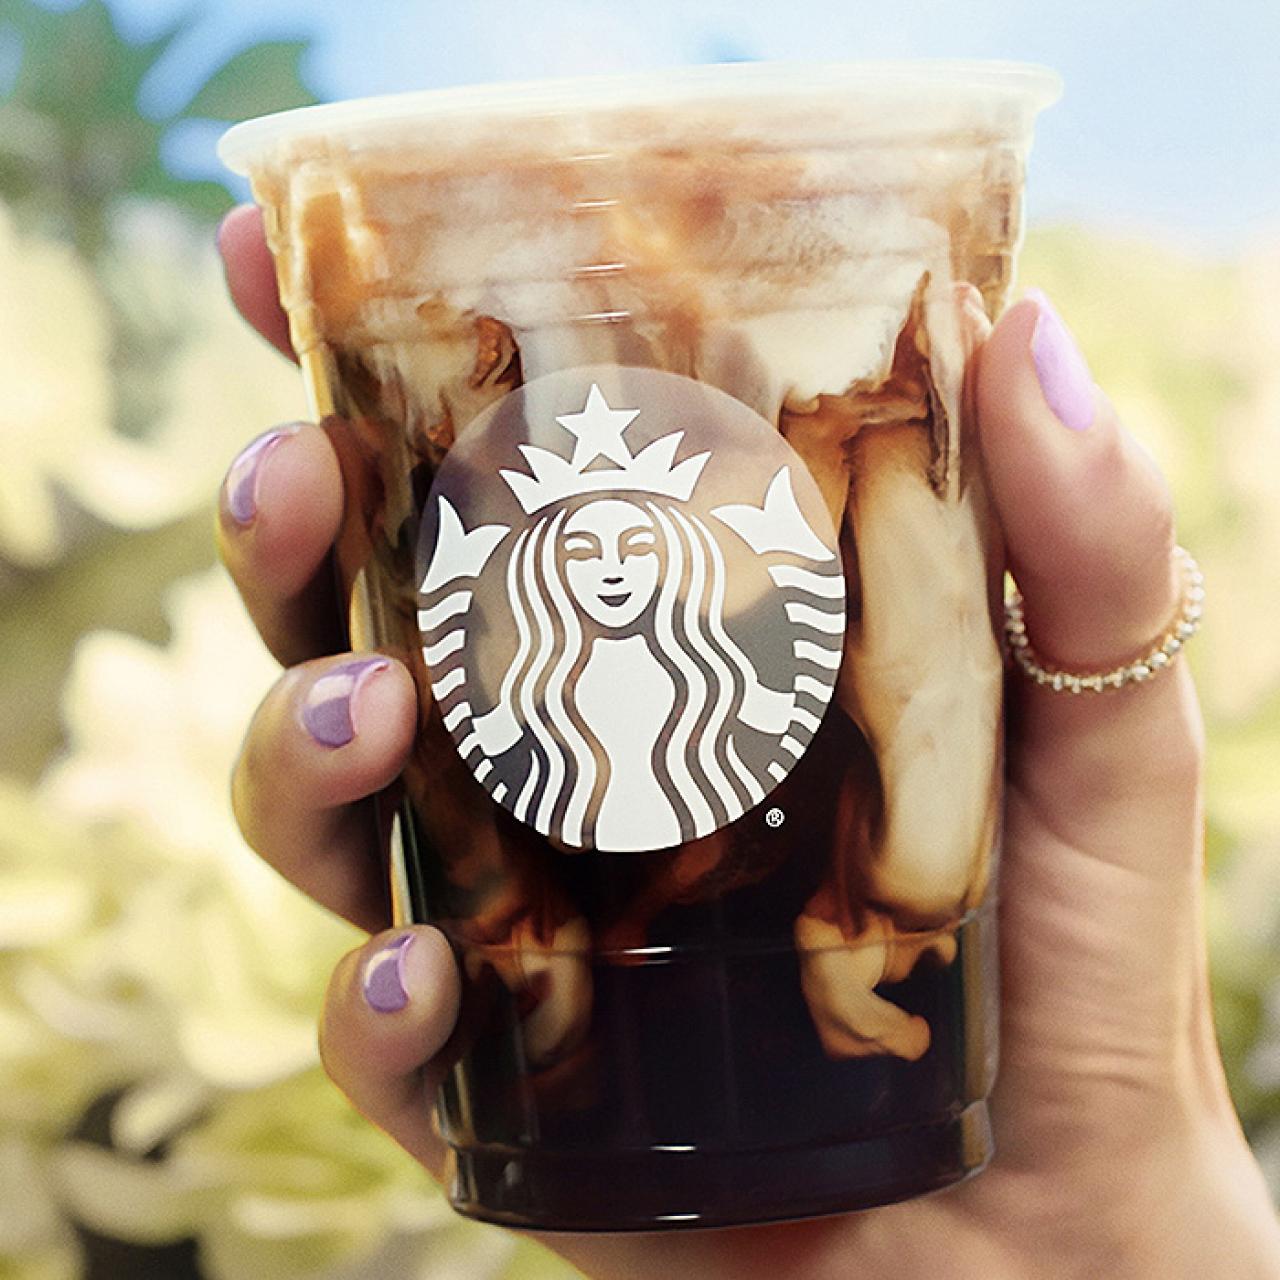 I Tried 7-Eleven's Iced Coffee to See If It's Better Than Starbucks - Parade